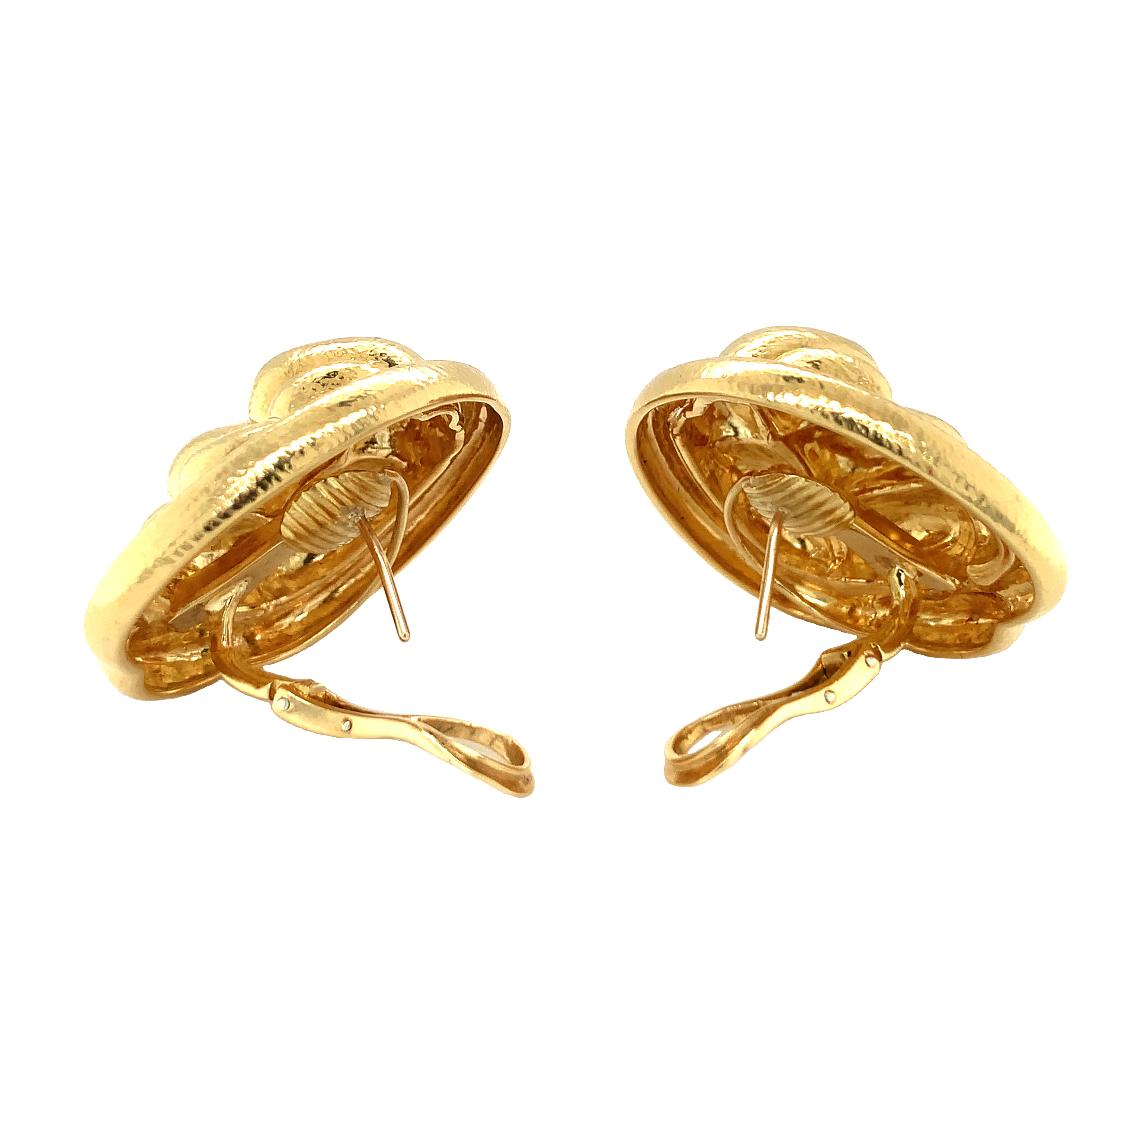 One pair of finely hammered 18K yellow gold earrings in an abstract oval shape, with posts and backs. Circa 1960s.

Glowing, grand, gorgeous.

Additional Information:
Metal: 18K yellow gold
Circa: 1960s
Stamp/Hallmark: 750
Size/Measurements: 36